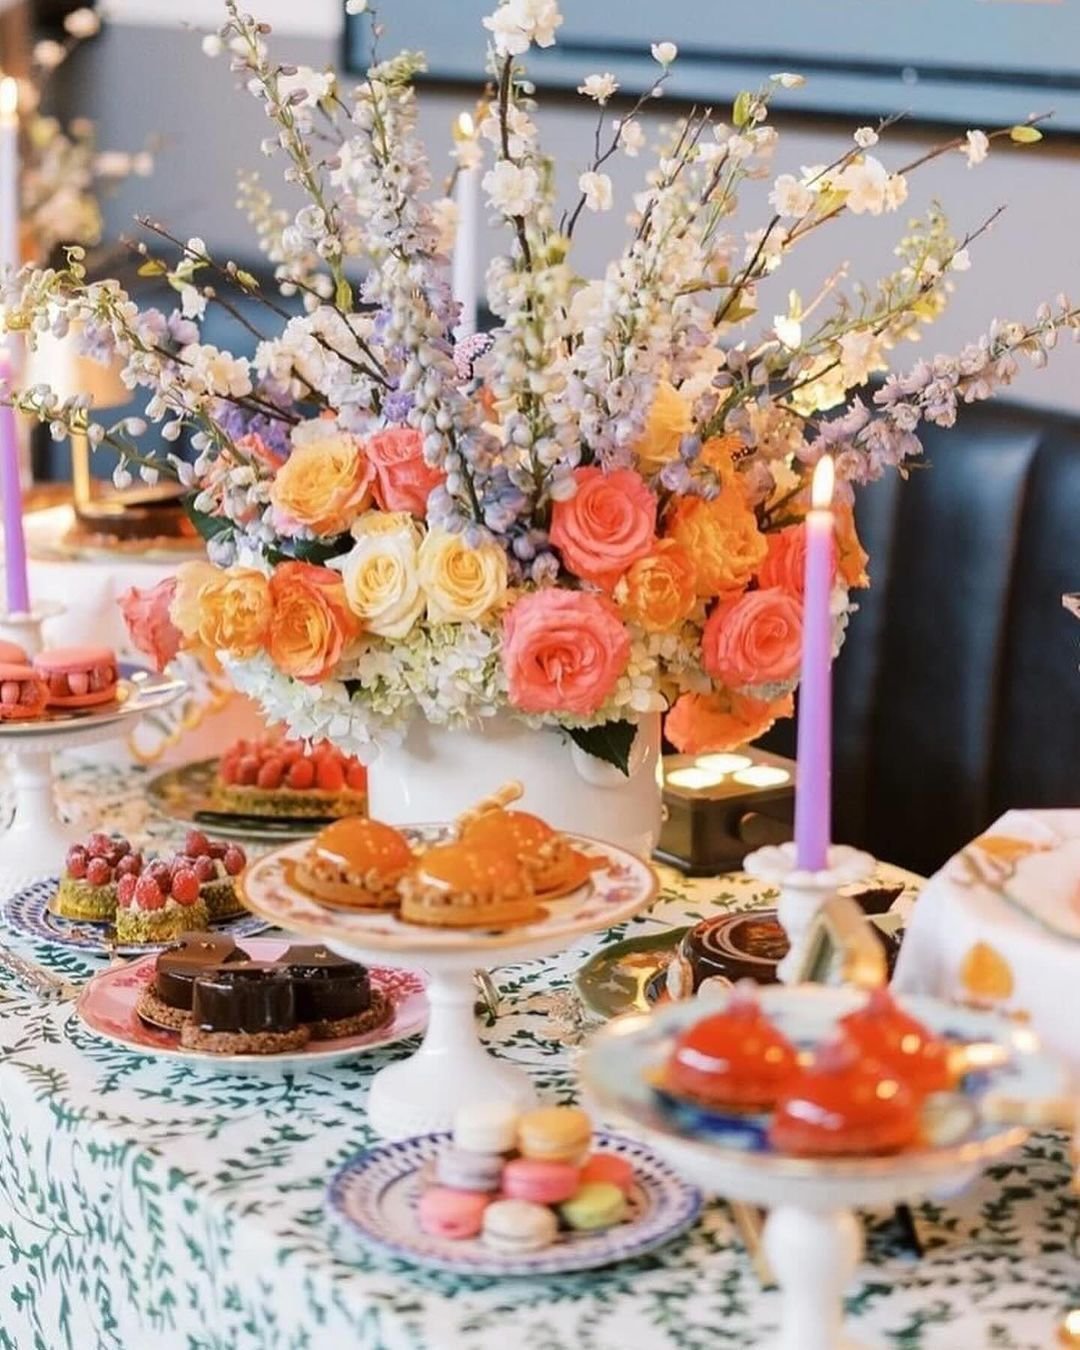 Thank you to @setwithgrace_ for sharing their beautiful dessert table presentation featuring our pastries and macarons- what a fun and creative way to offer a variety of desserts to the guests at your next event!